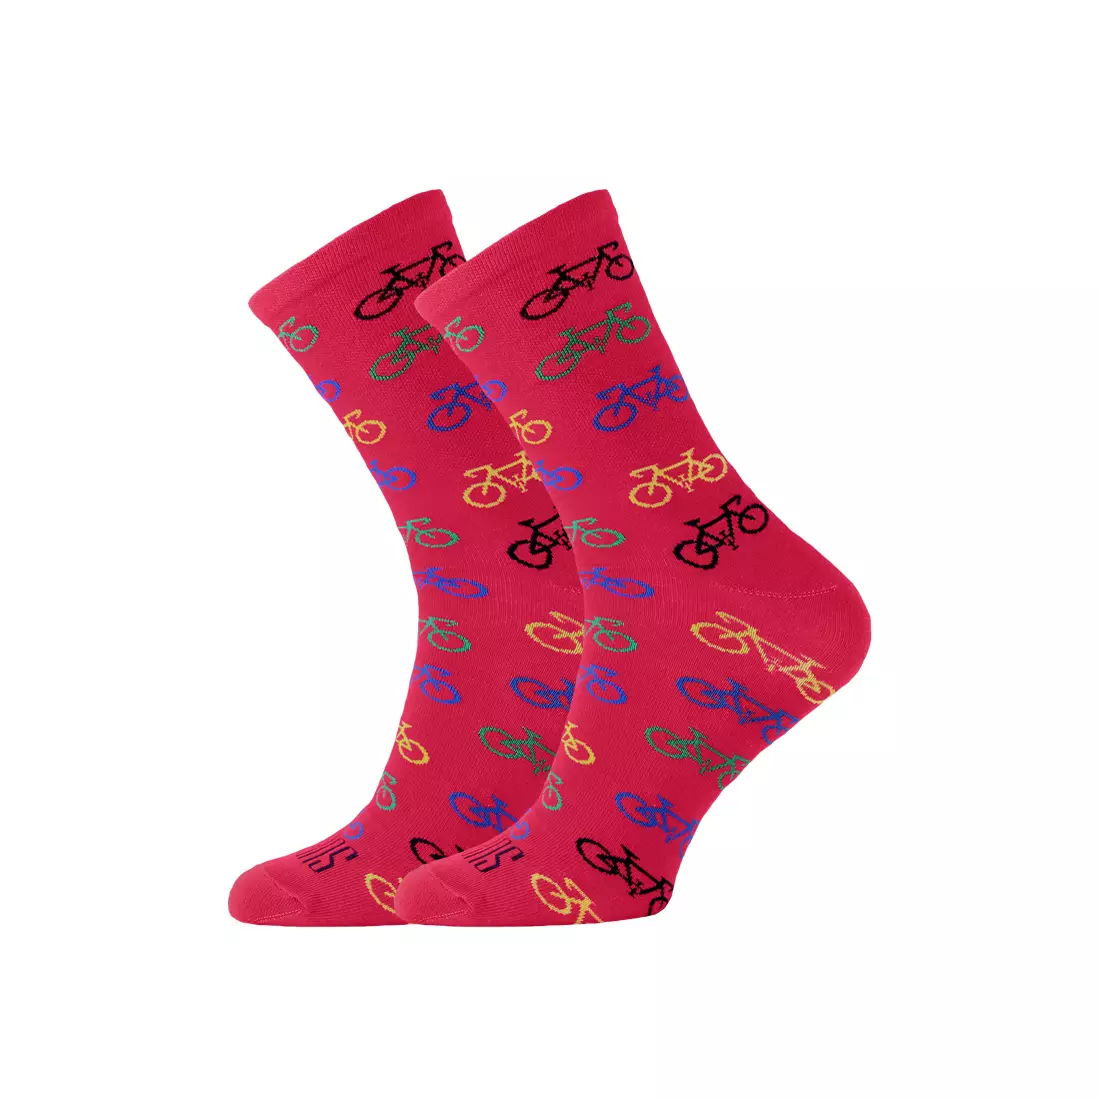 SUPPORTSPORT socks CYCLING PASSION pink